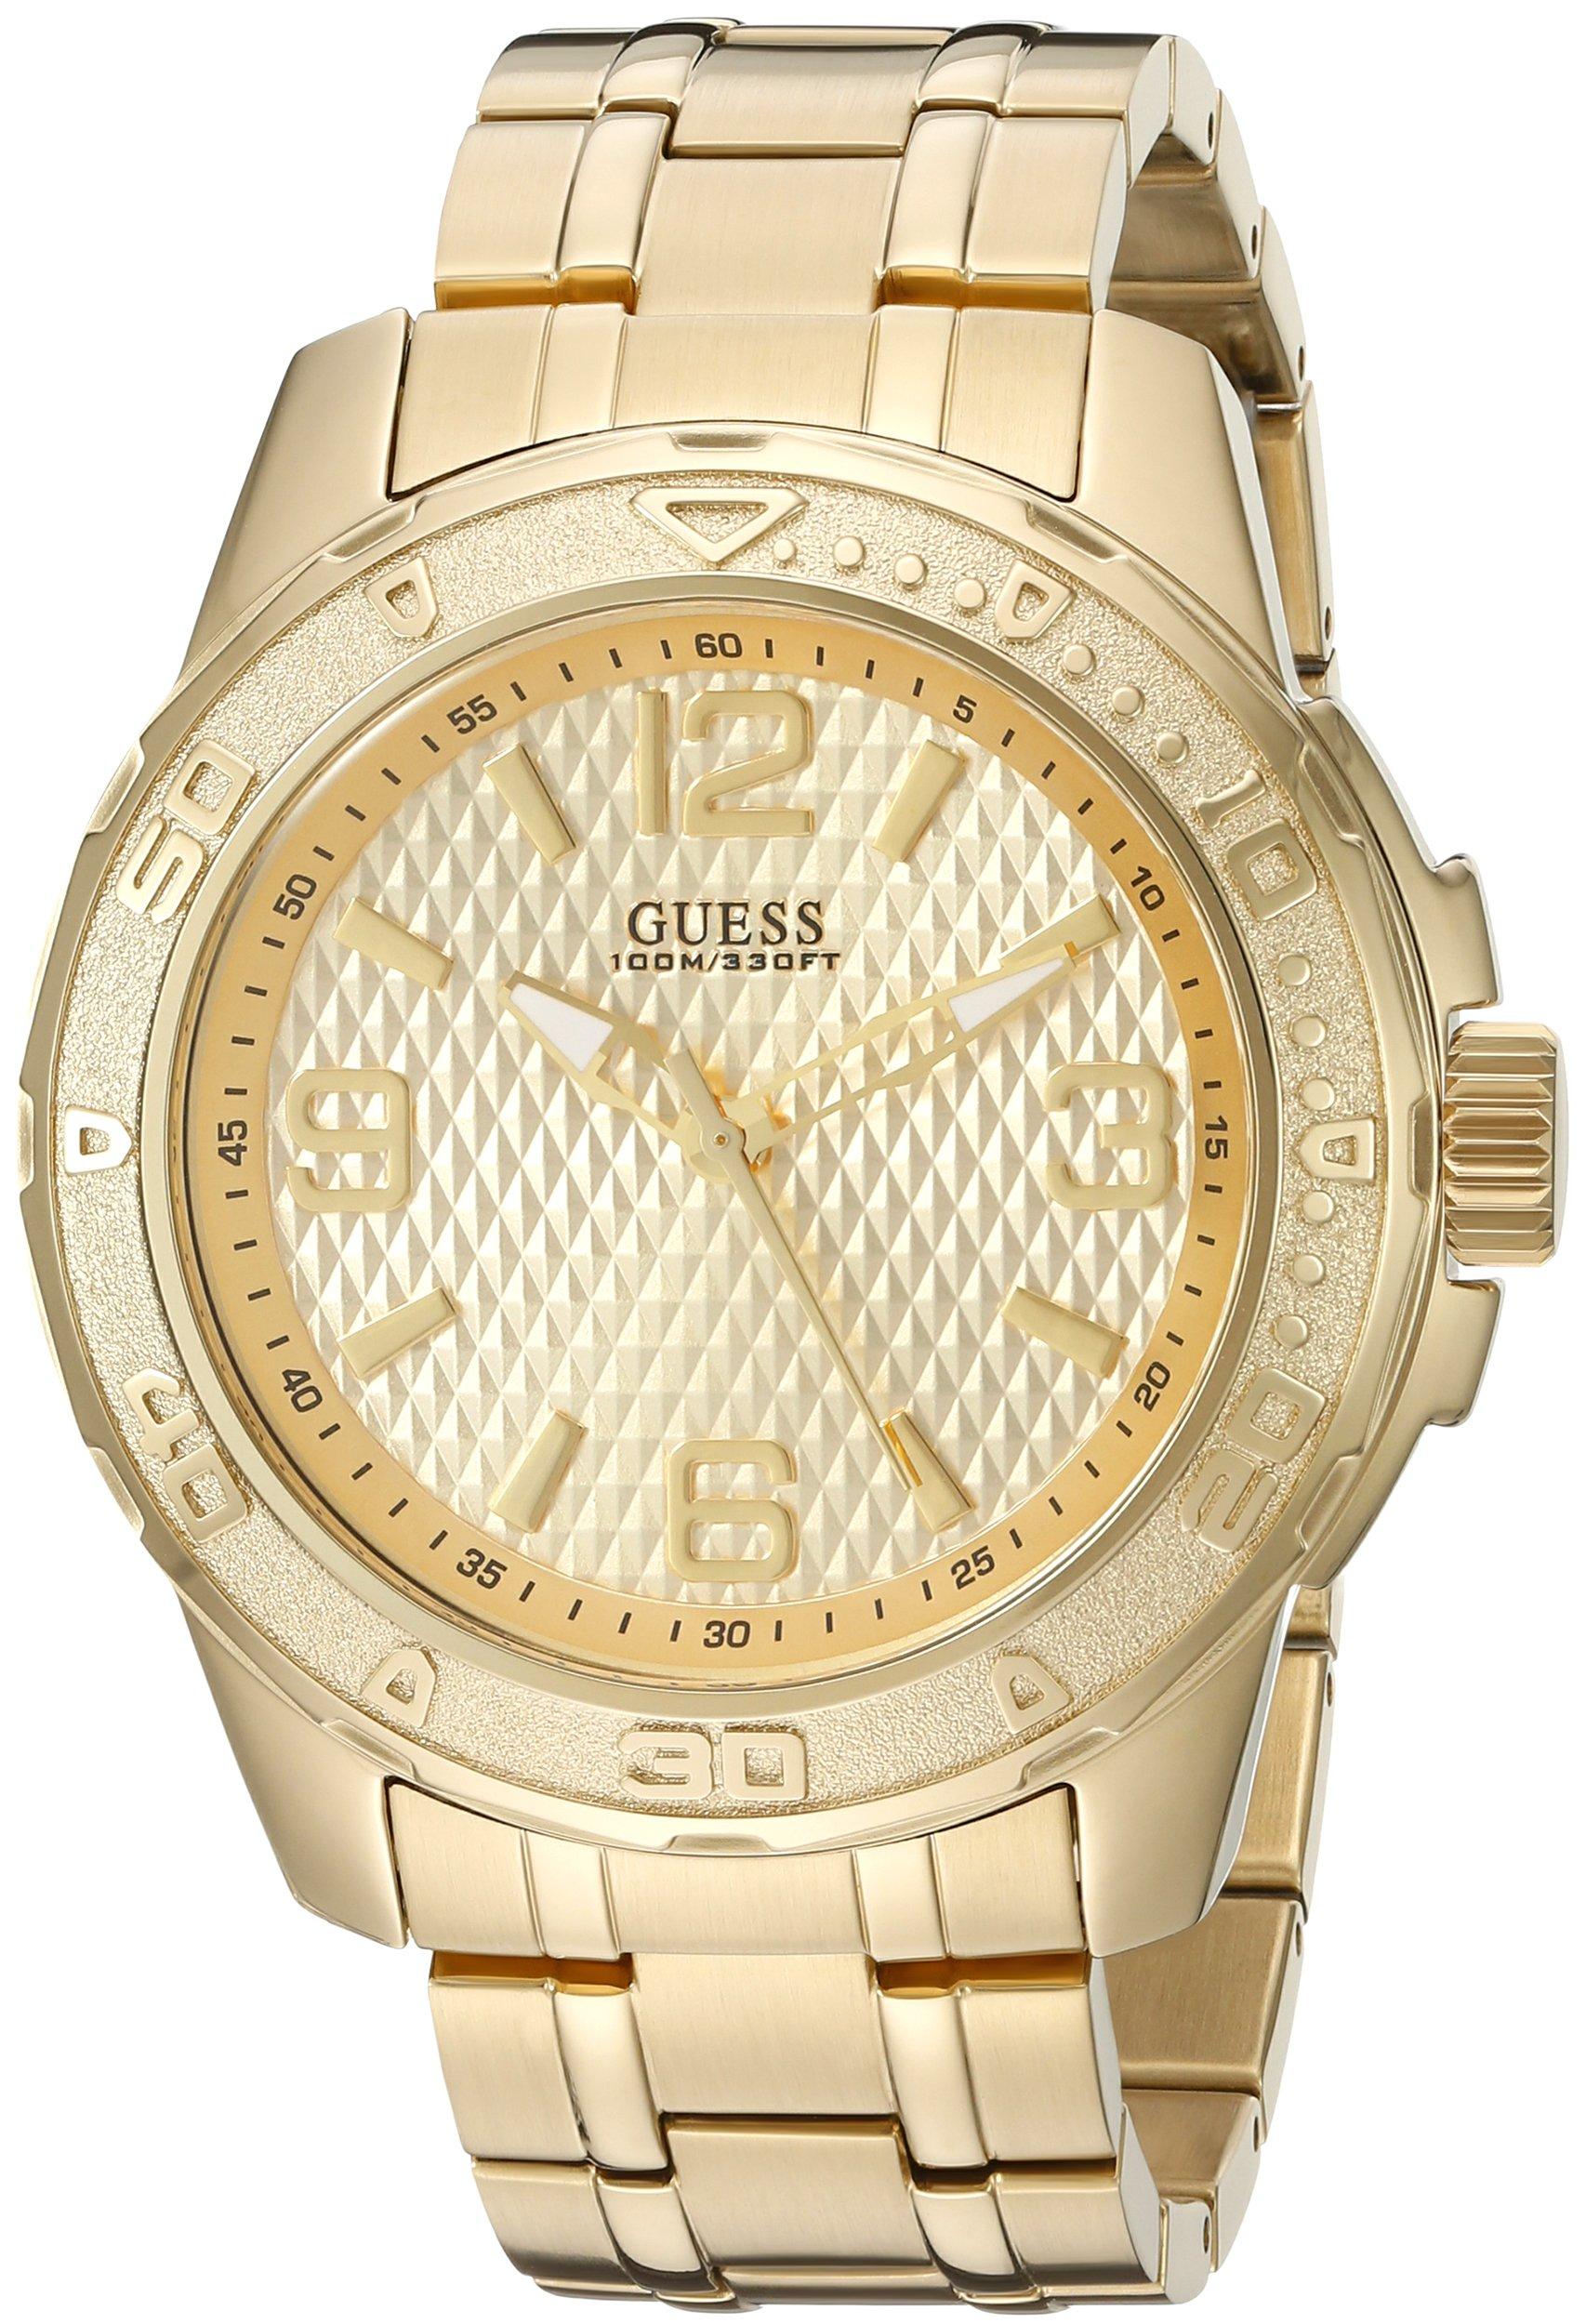 Guess Men's Gold-tone Stainless Steel Bracelet Watch U0681g2 in Gold Tone (Metallic) for Men - Save - Lyst